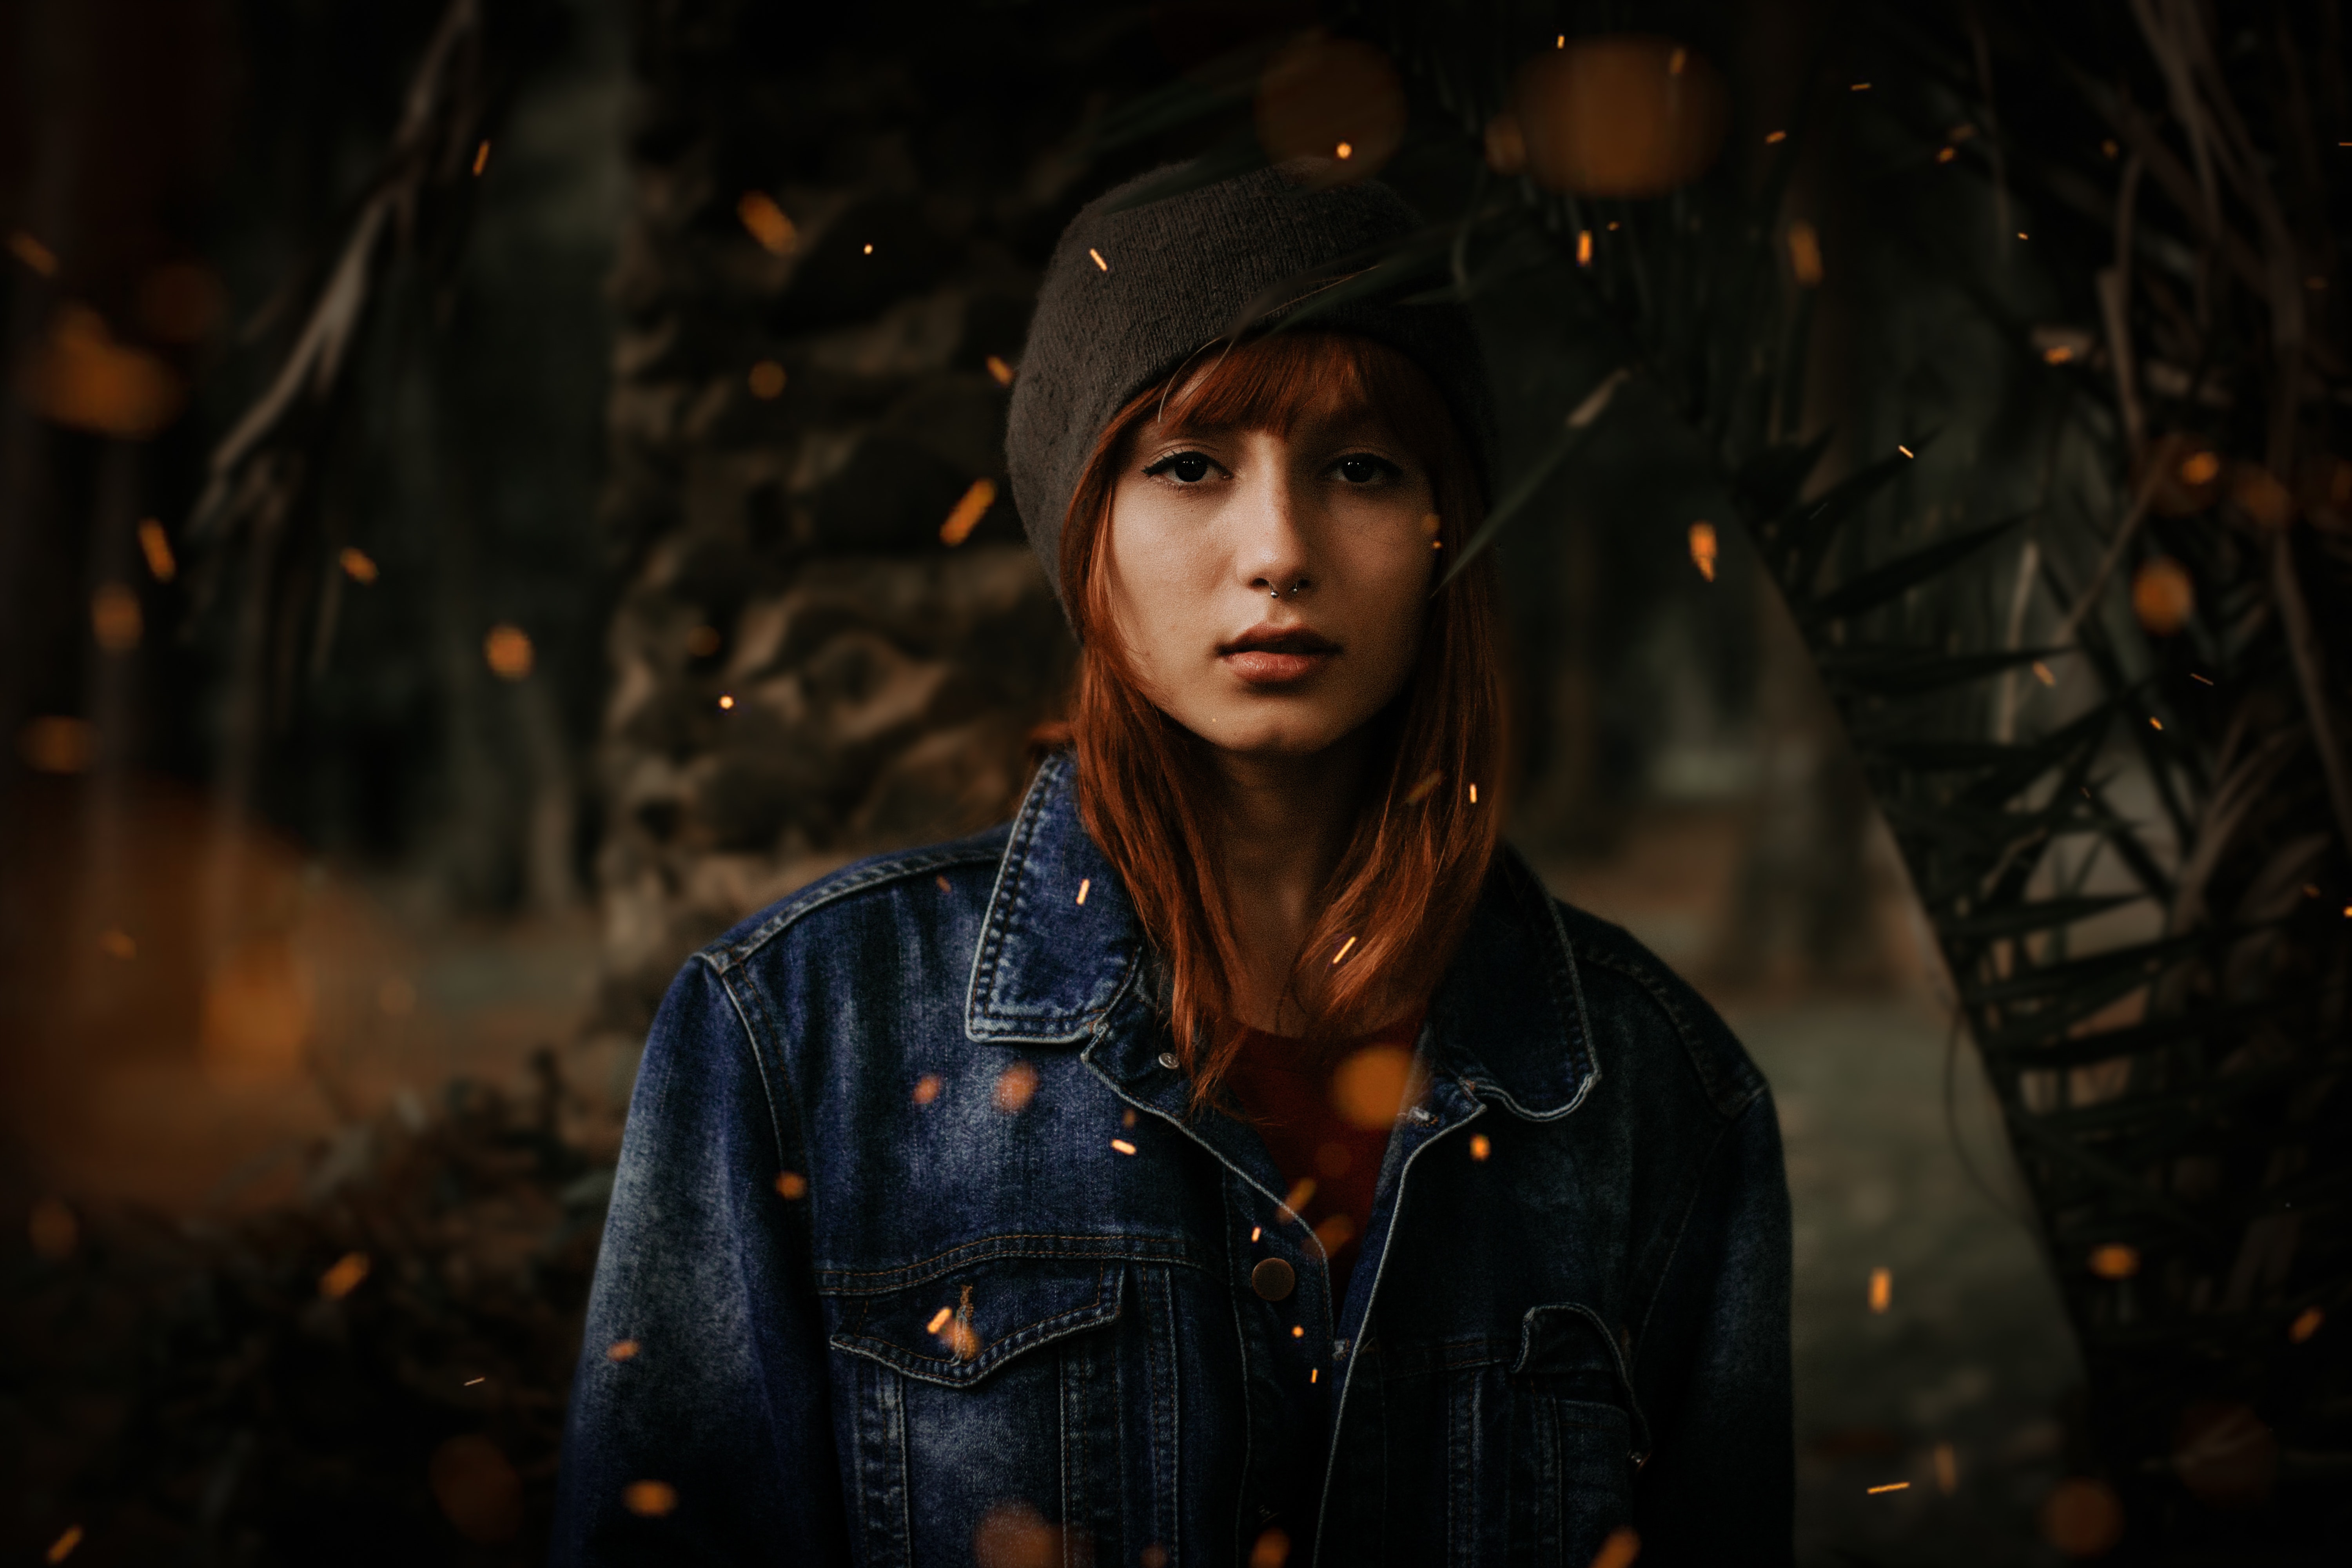 Photo of a young woman wearing a black hat and denim jacket